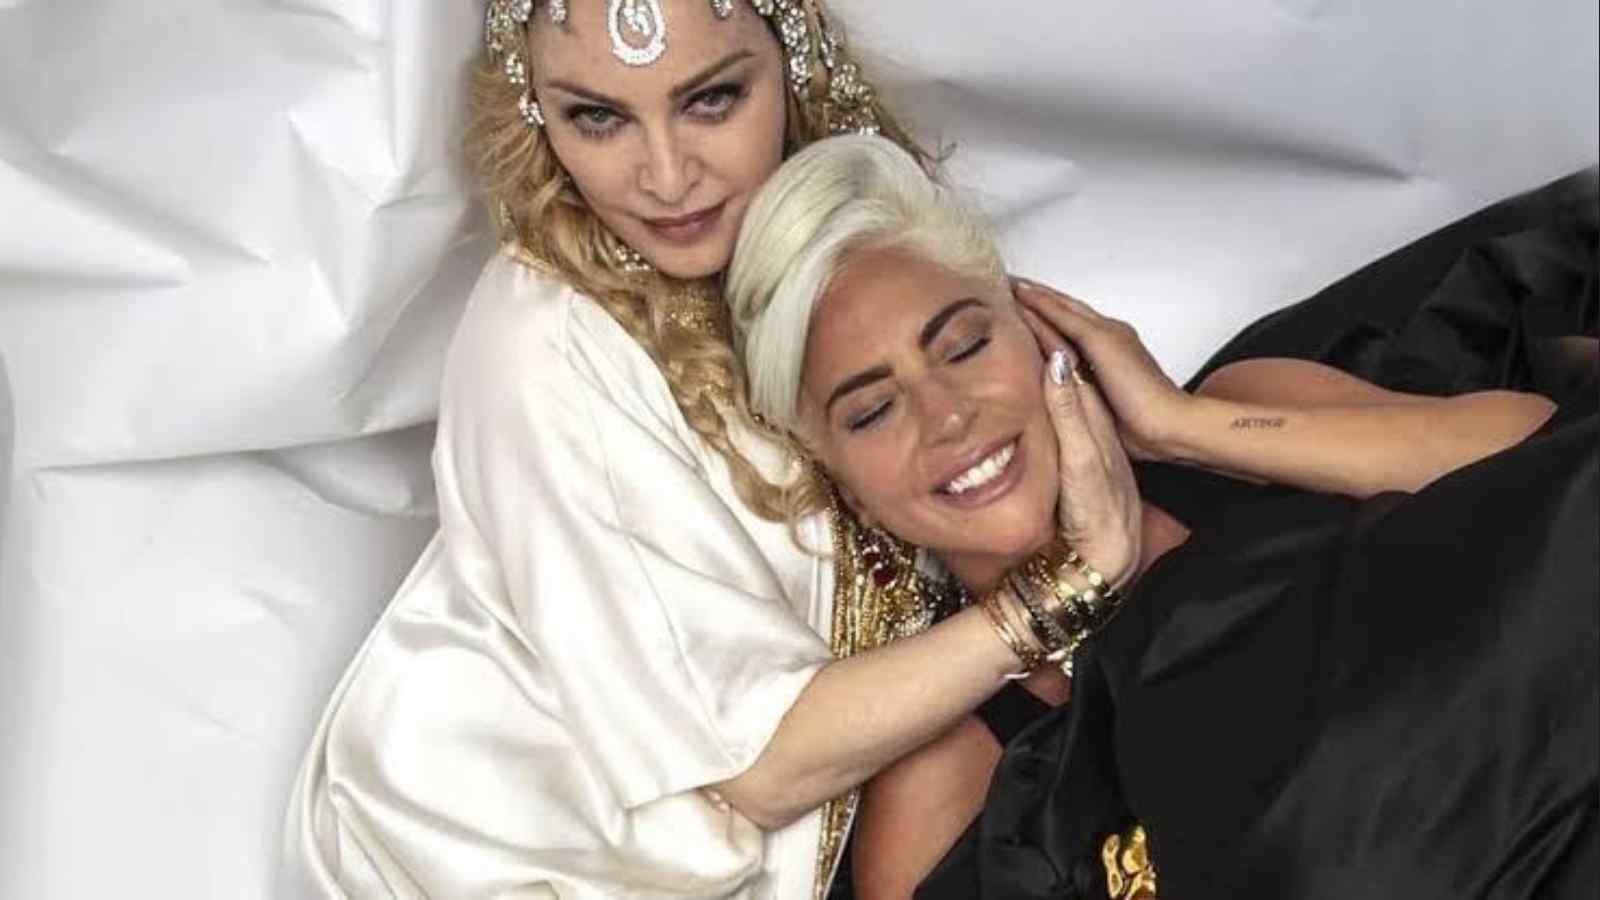 Madonna and Lady Gaga had a back and forth feud going on